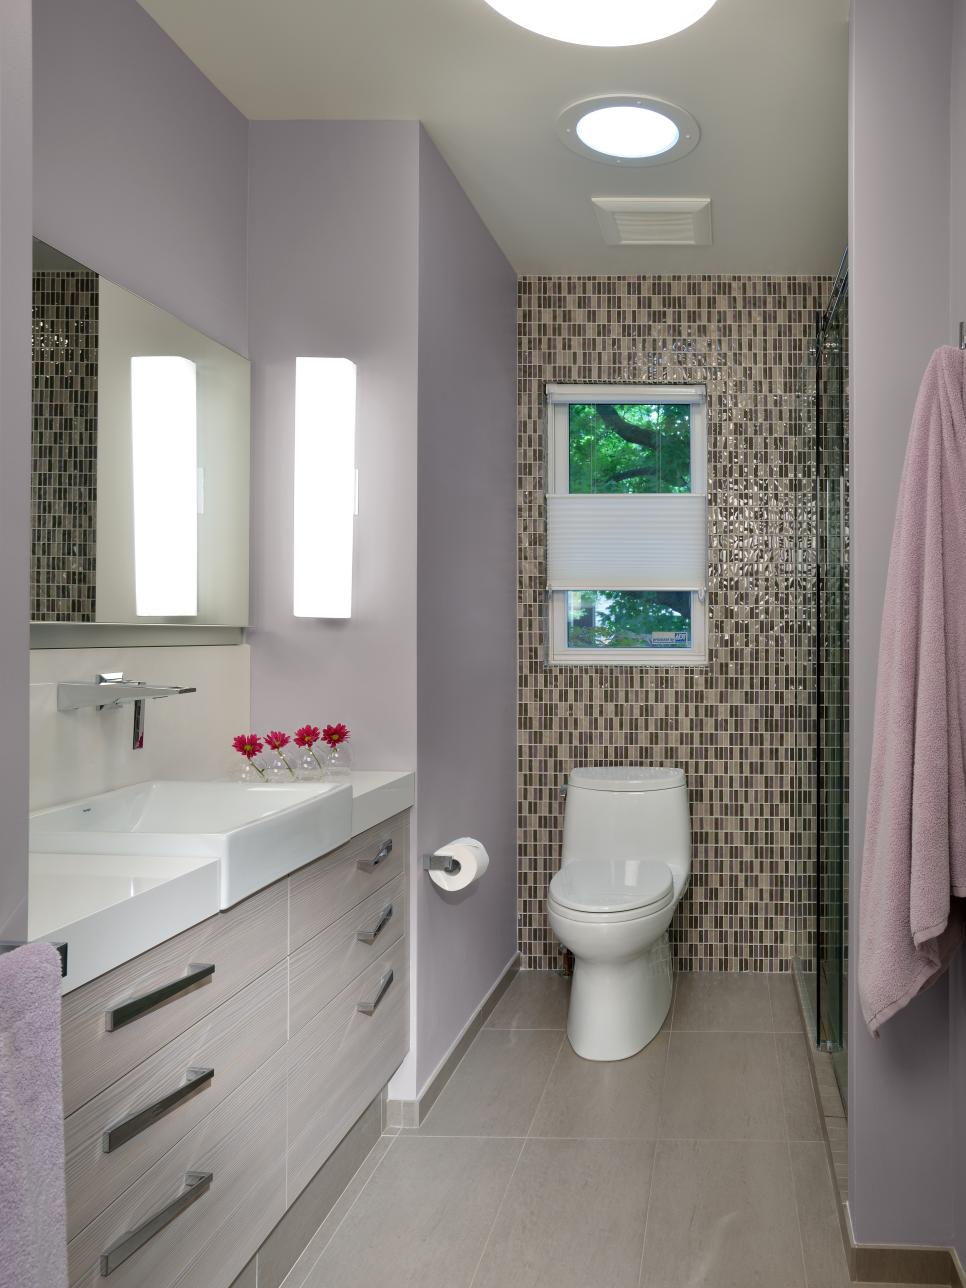 Contemporary Purple Bathroom With Tile Accent Wall | HGTV